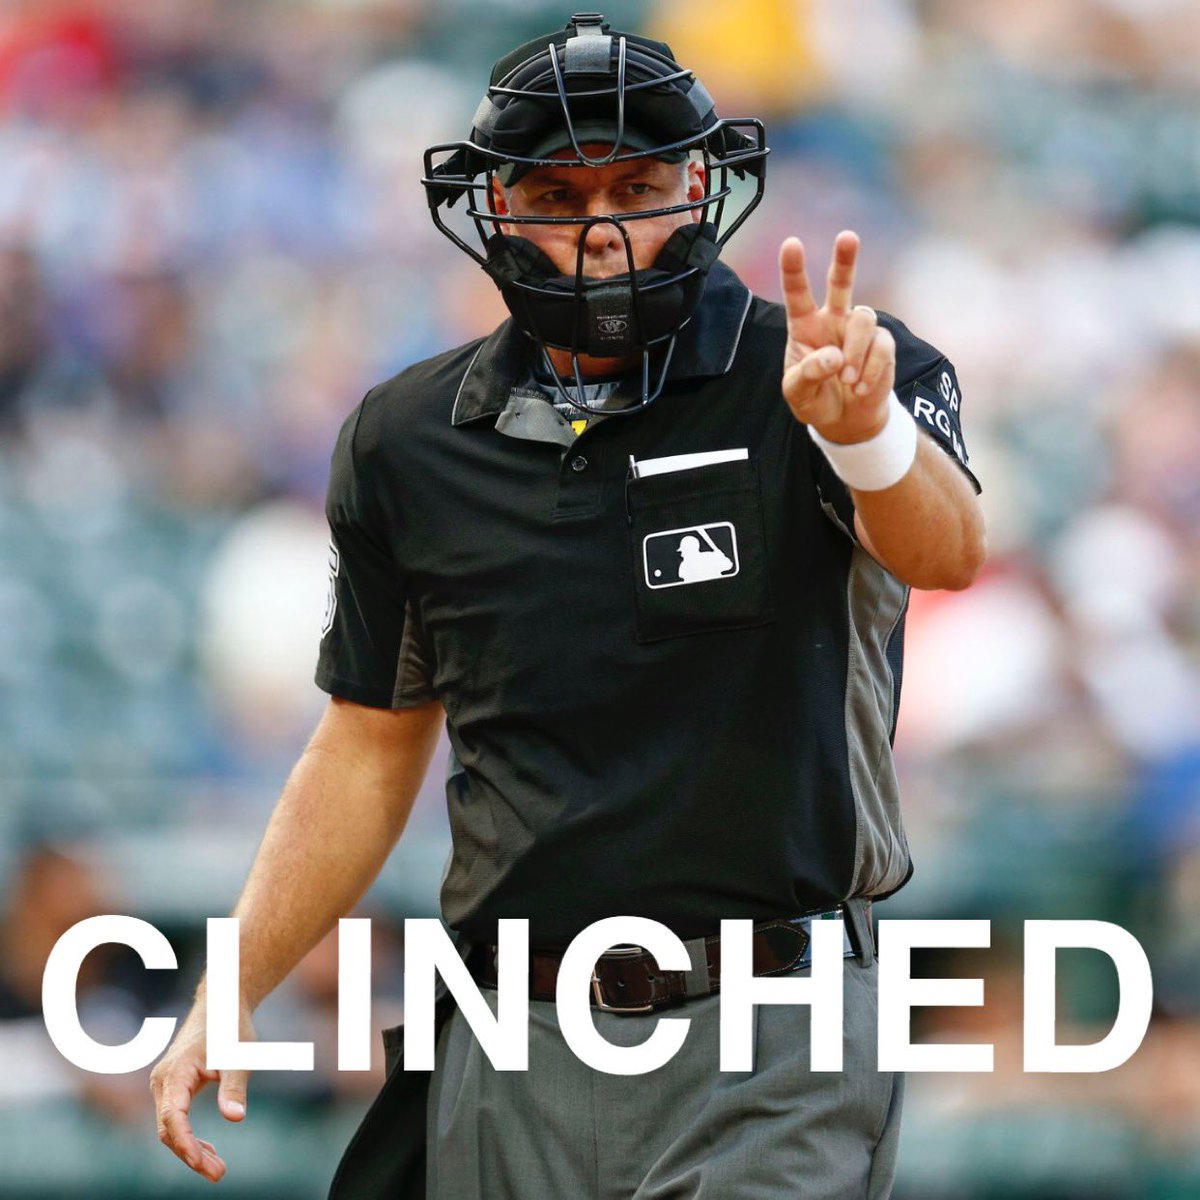 BREAKING NEWS: The Umpires have clinched a playoff birth.